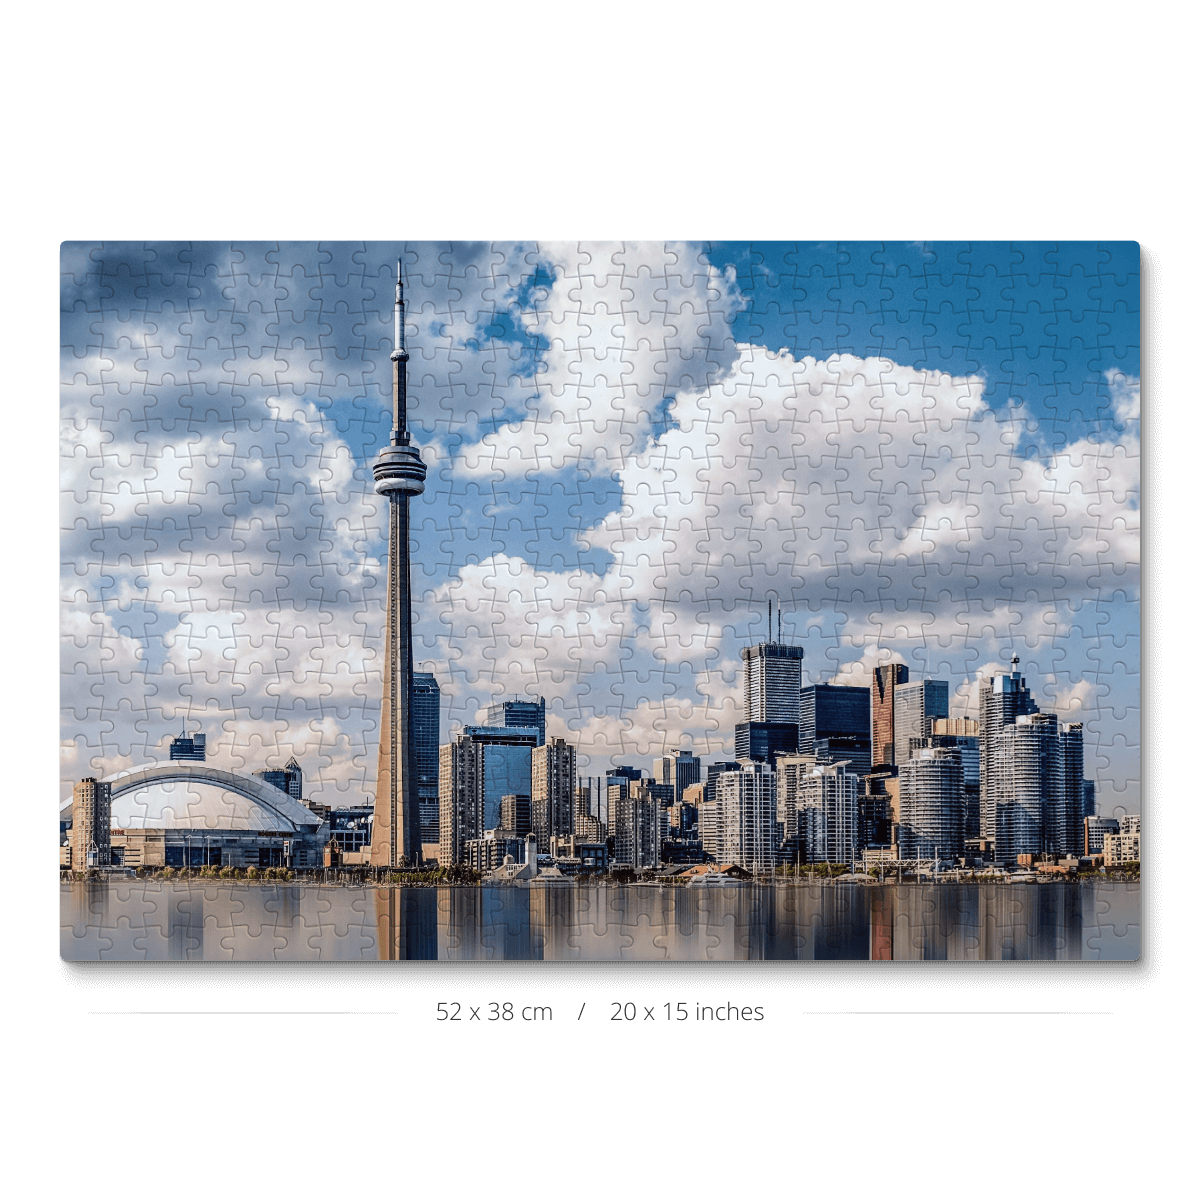 A jigsaw puzzle with 500 pieces showcasing the CN Tower and Toronto skyline.